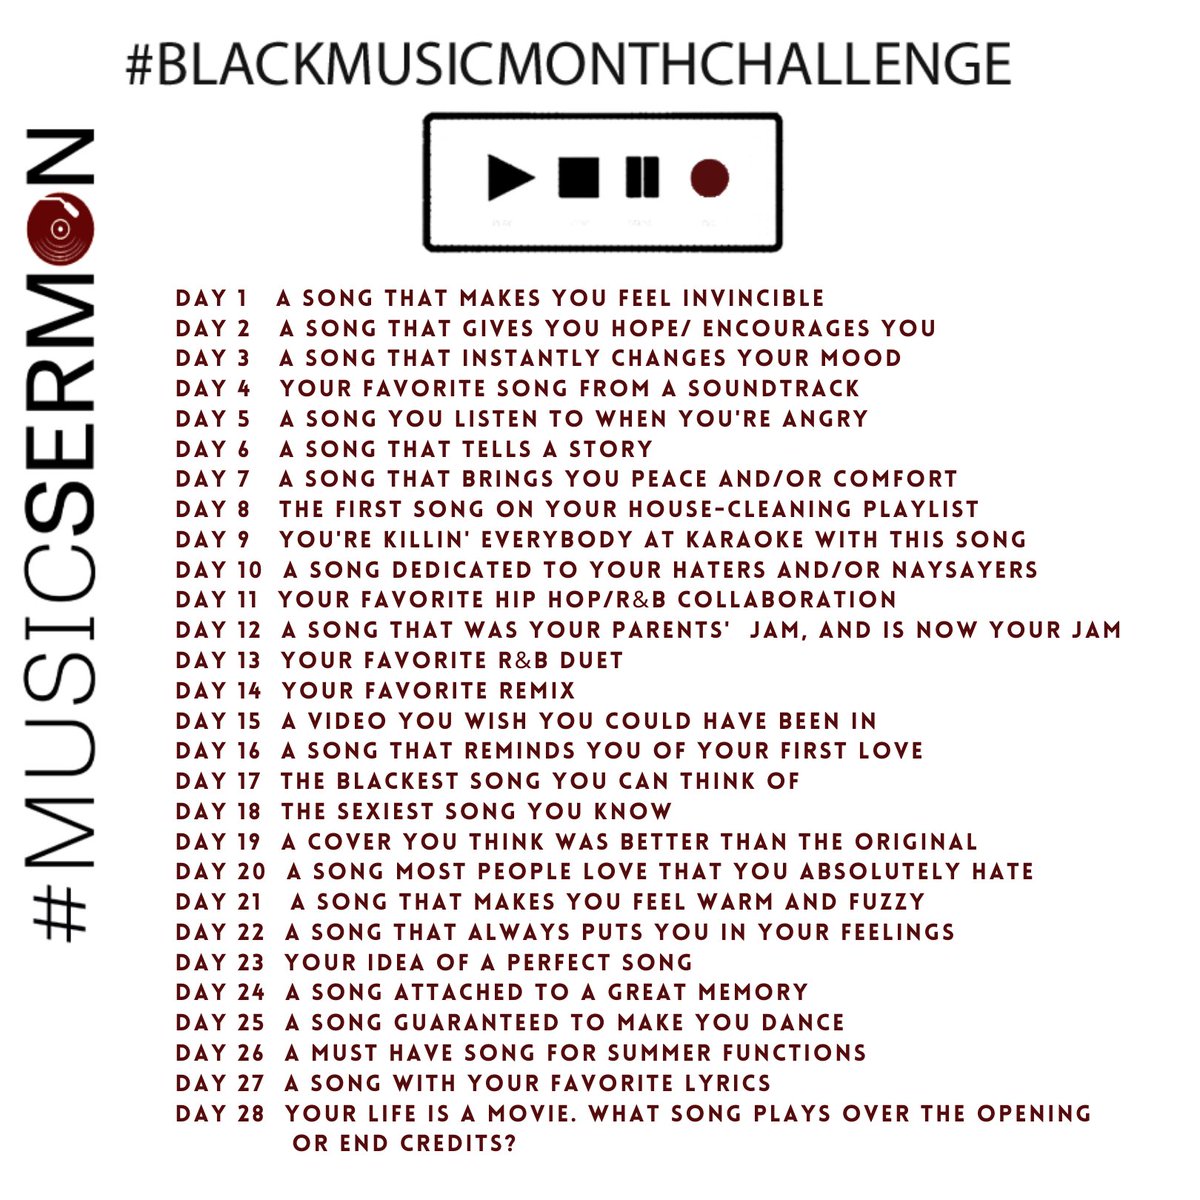 Revised  #BlackMusicMonth graphic with #2 (my bad).